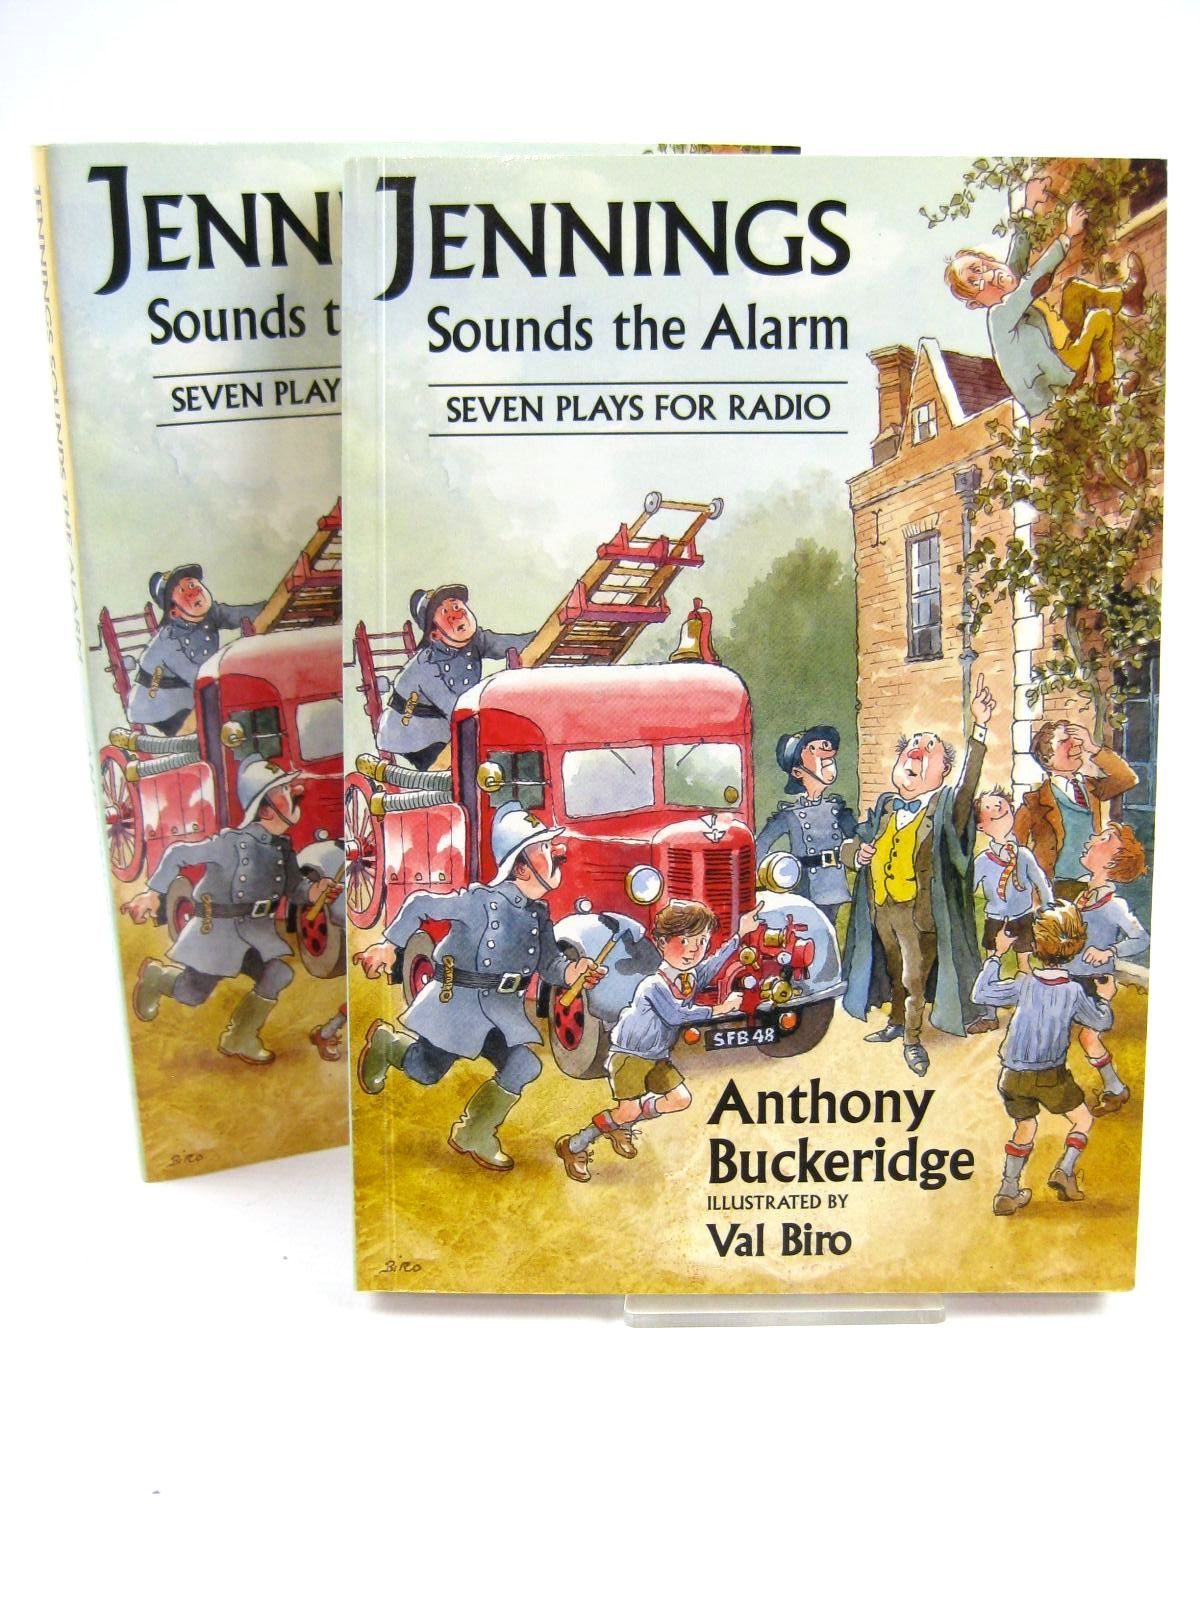 Cover of JENNINGS SOUNDS THE ALARM by Anthony Buckeridge